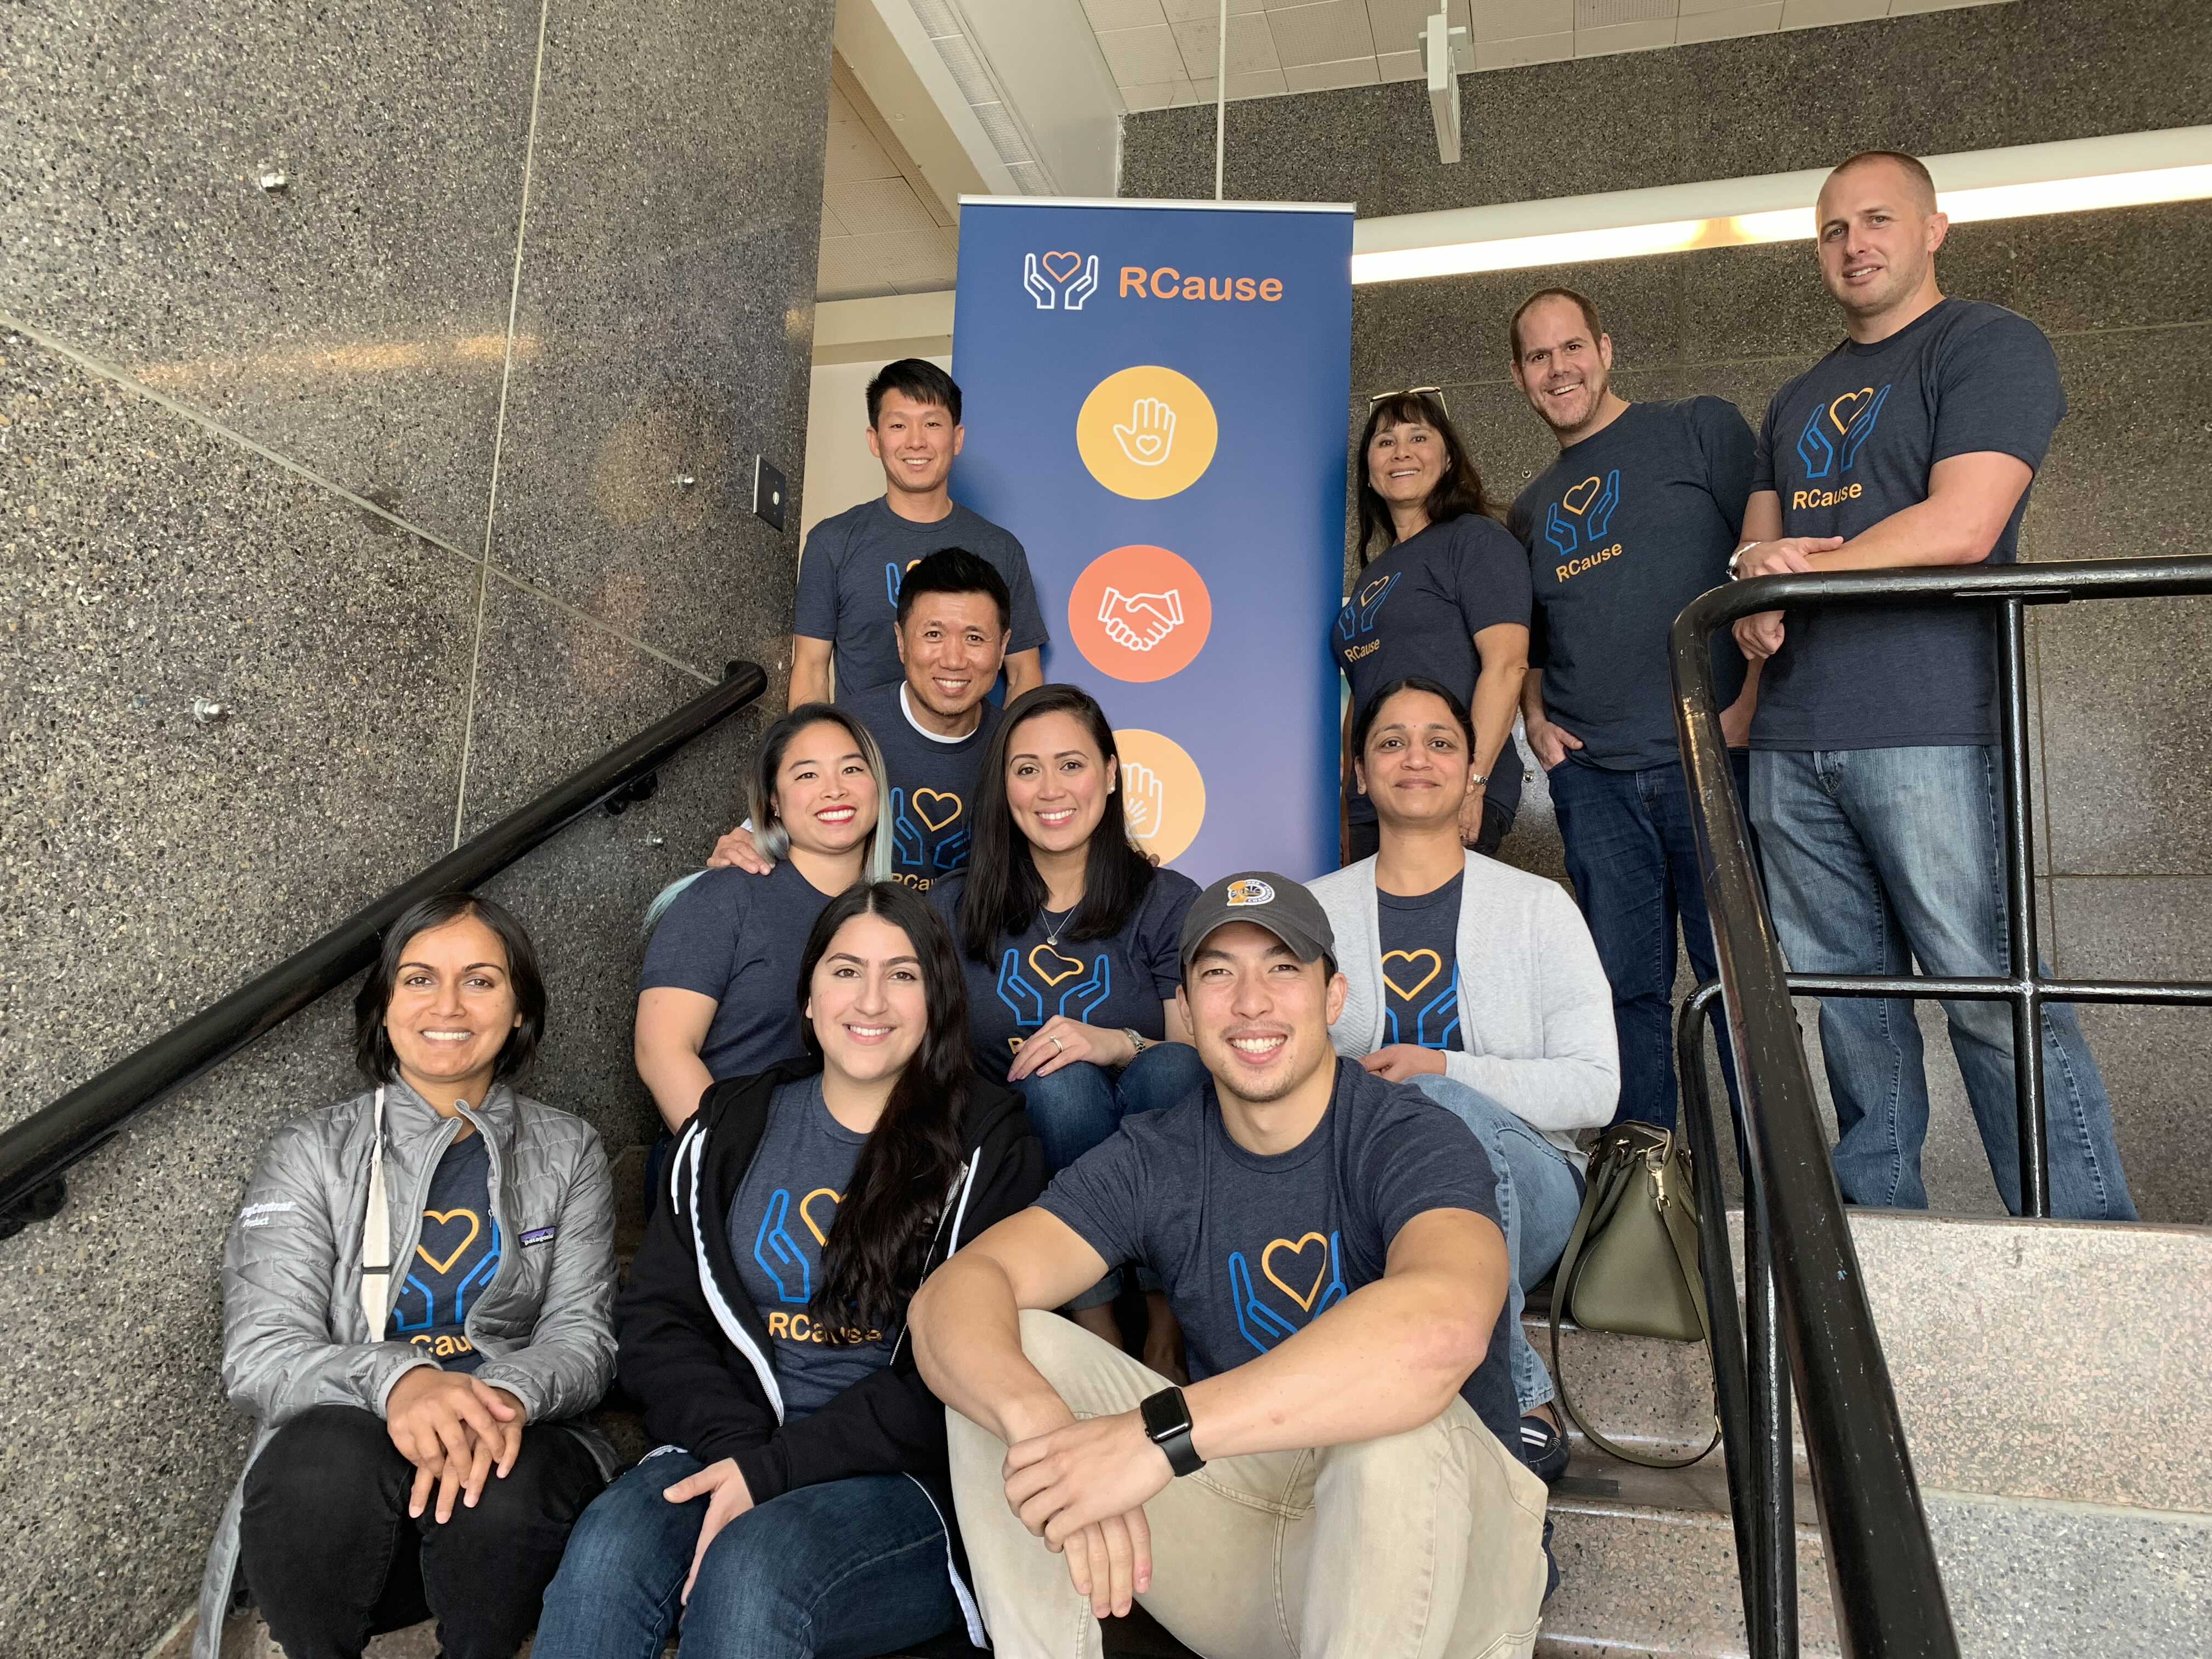 RingCentral volunteer group